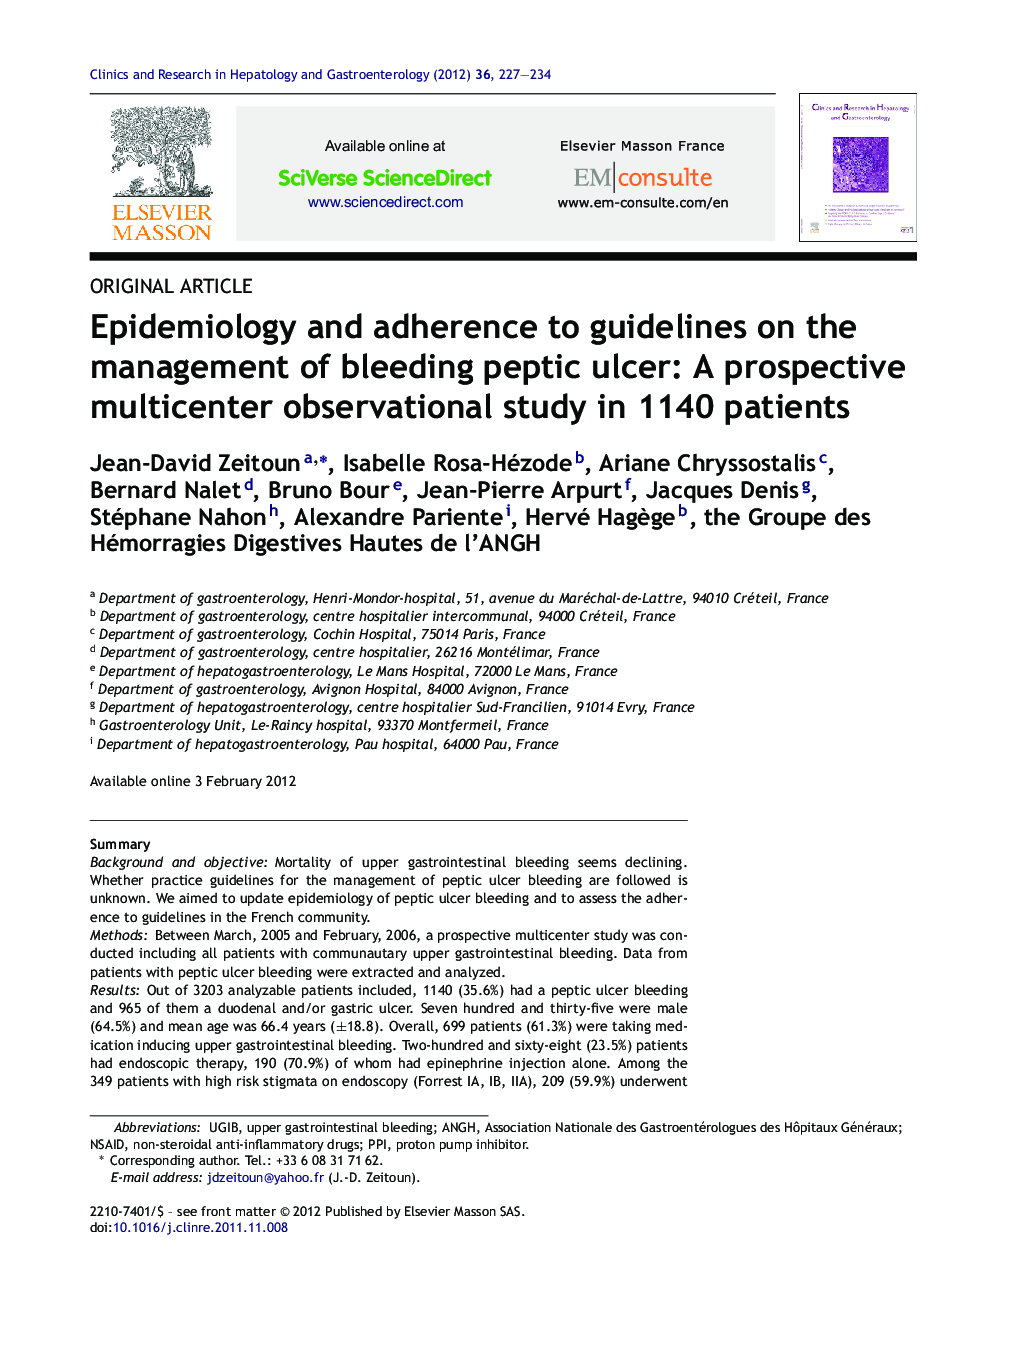 Epidemiology and adherence to guidelines on the management of bleeding peptic ulcer: A prospective multicenter observational study in 1140 patients